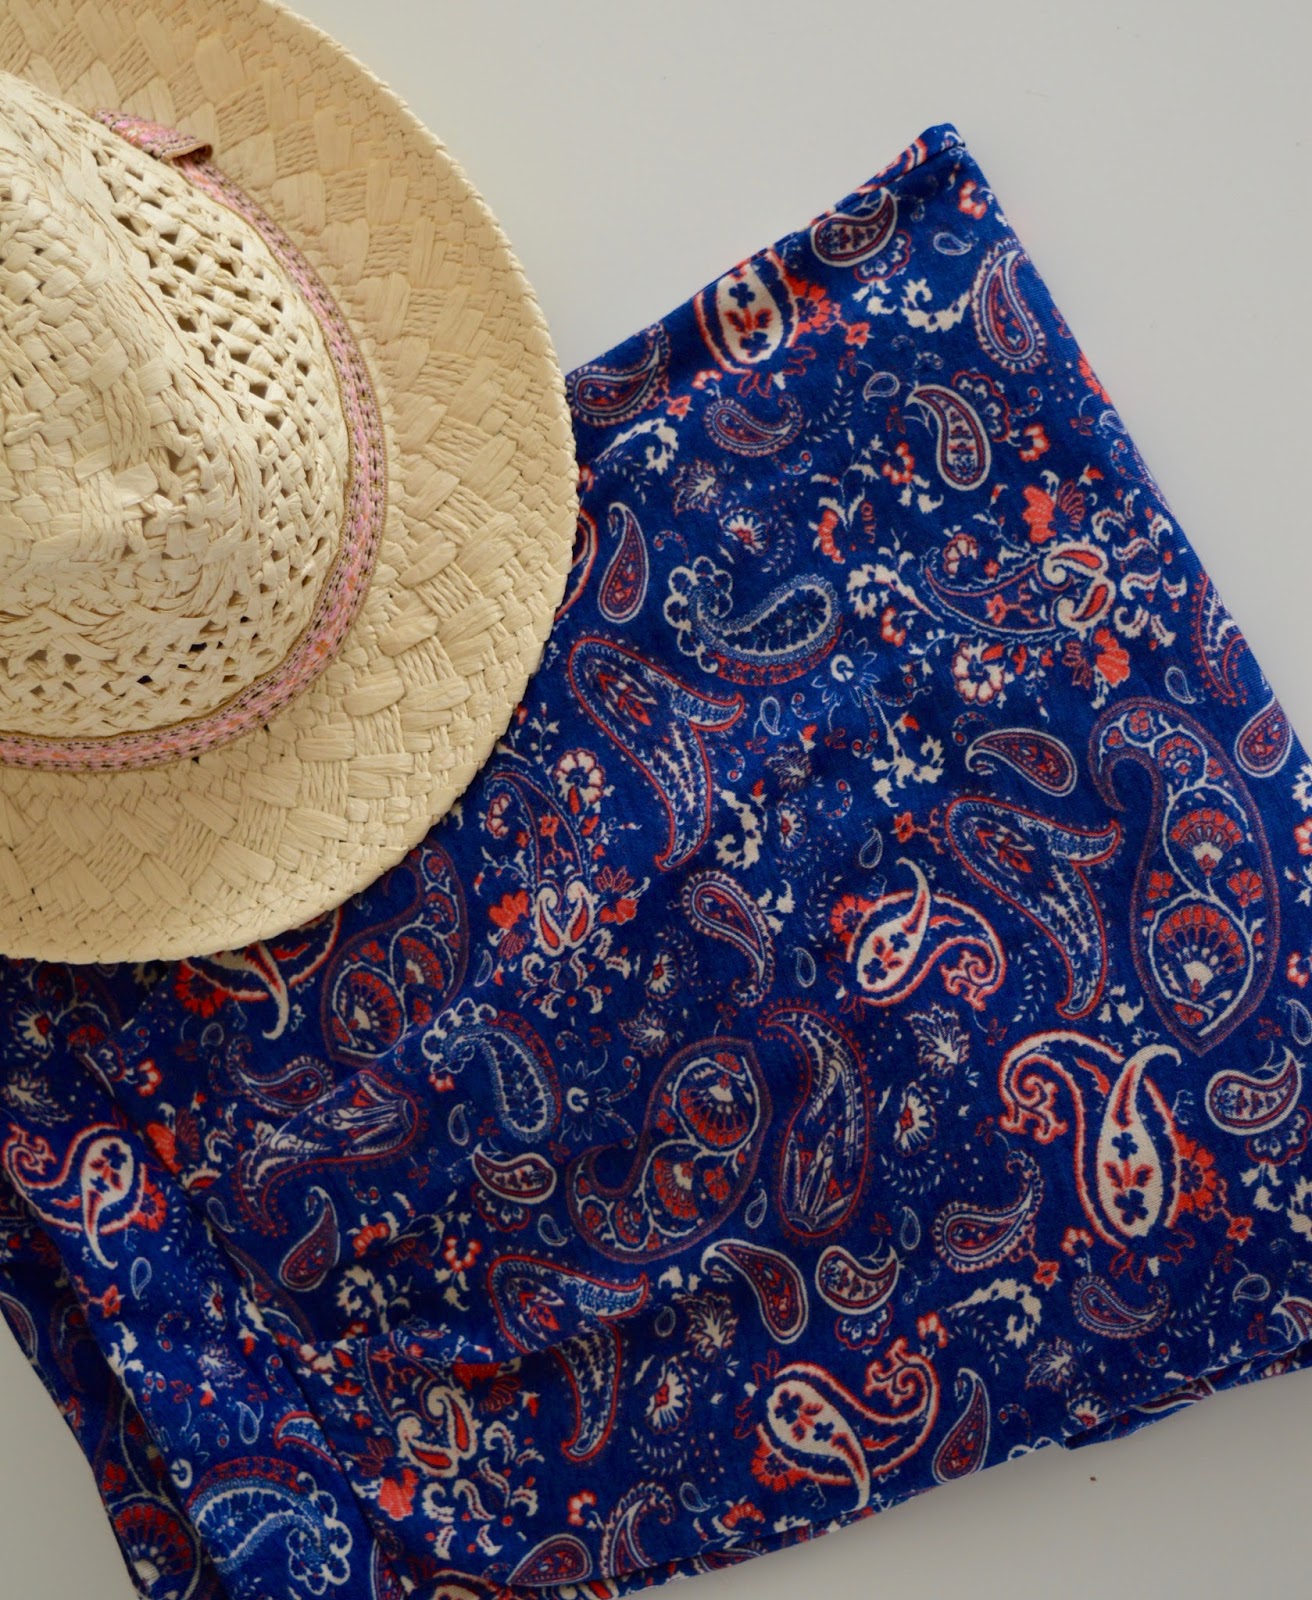 My BARGAIN holiday wardrobe from Pep & Co